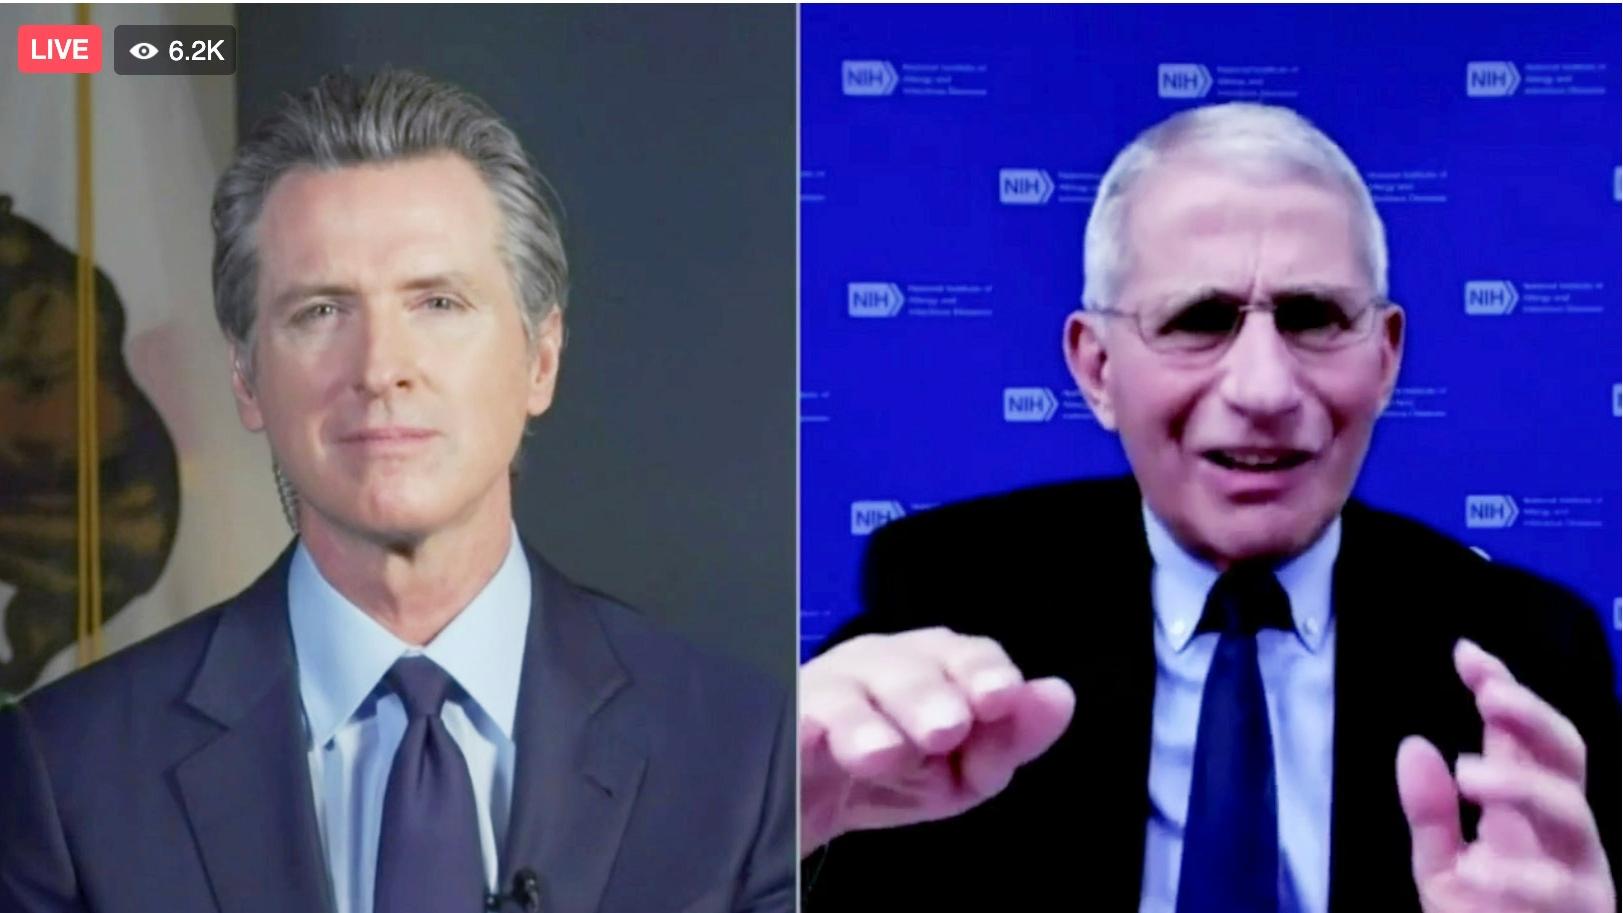 This frame from streaming video from the Office of the Governor shows California Gov. Gavin Newsom, left, and Dr. Anthony Fauci during a conversation, Wednesday, Dec. 30, 2020. (Office of the Governor via AP)